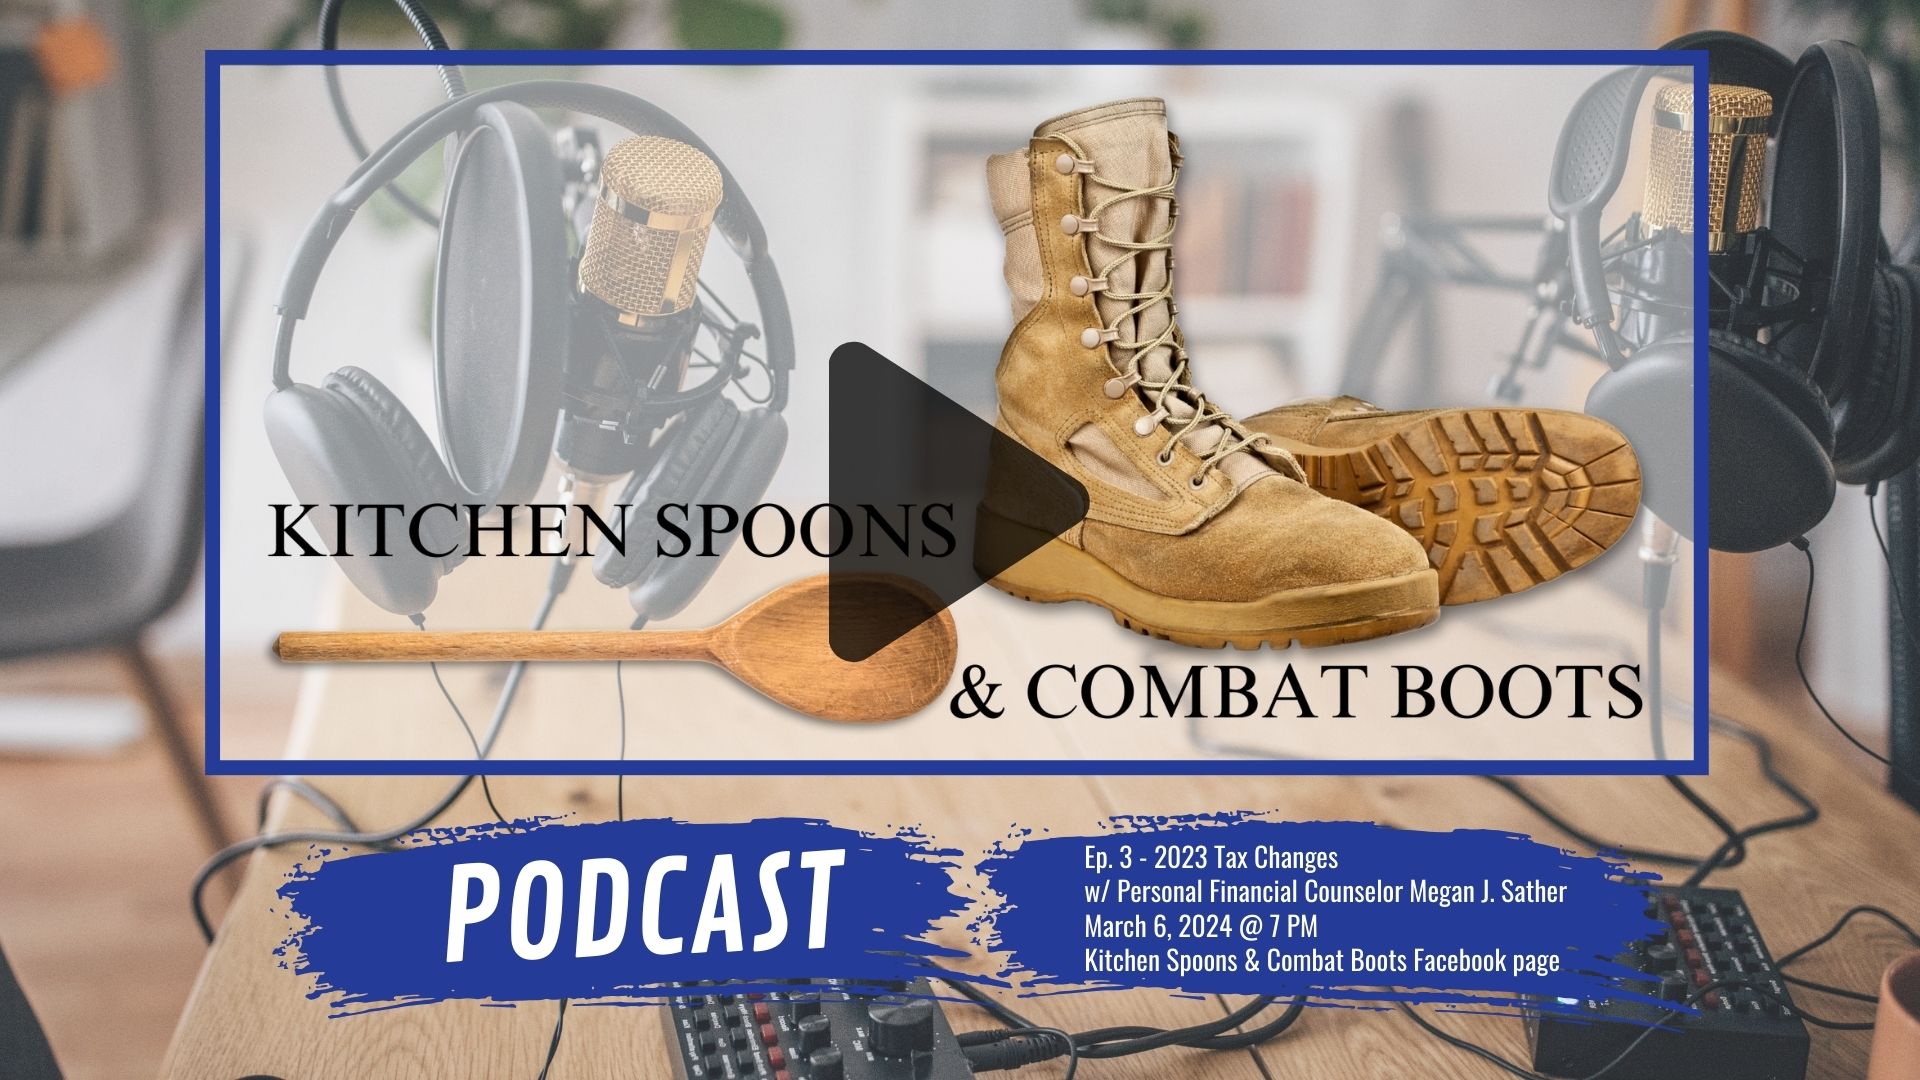 kitchen spoons & combat boots podcast Taex 2023